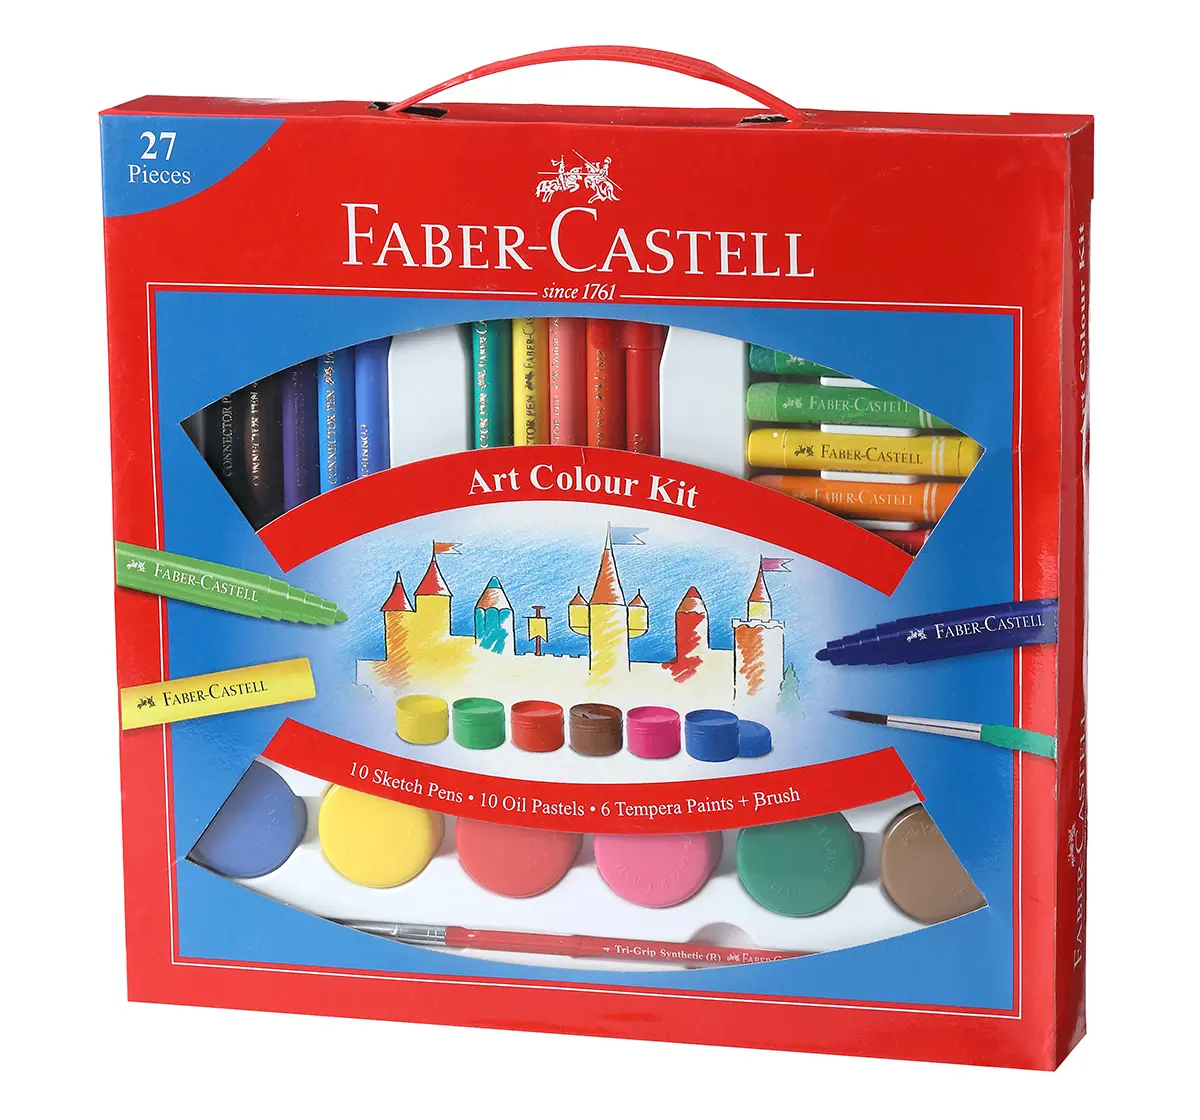 Faber-Castell 1410528 art colour kit with free paint brush, 3Y+